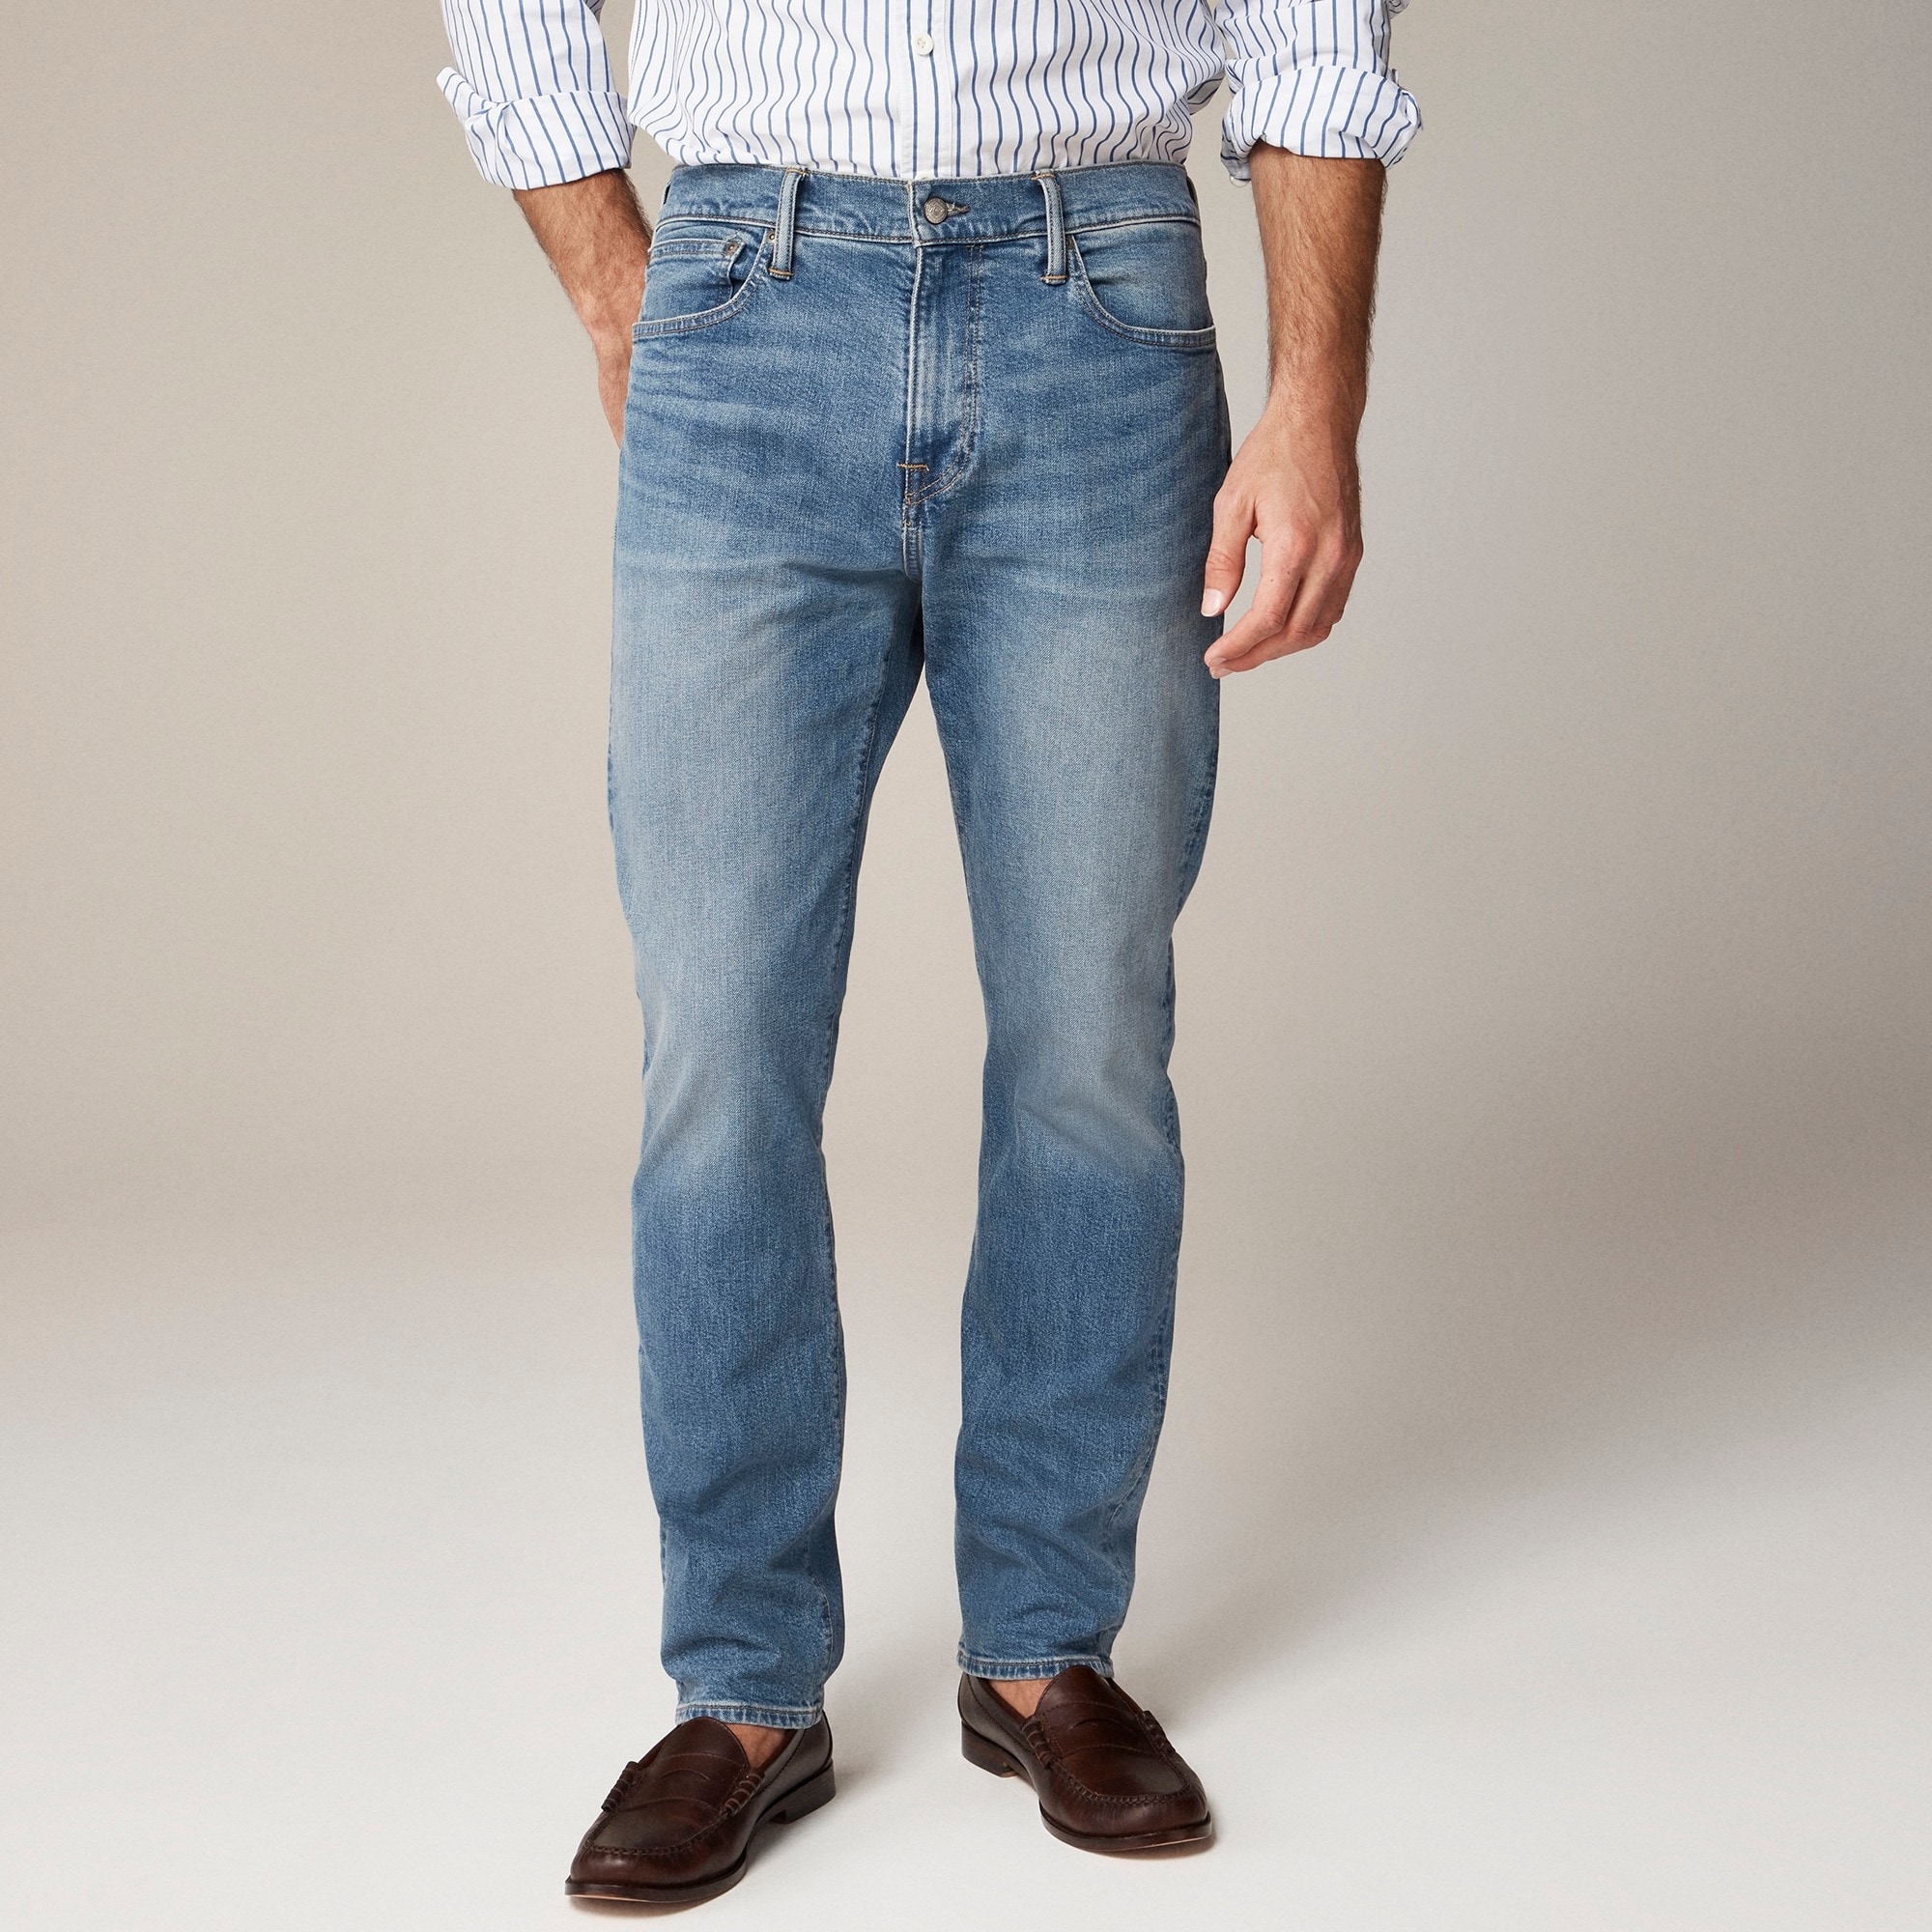  770™ Straight-fit stretch jean in three-year wash